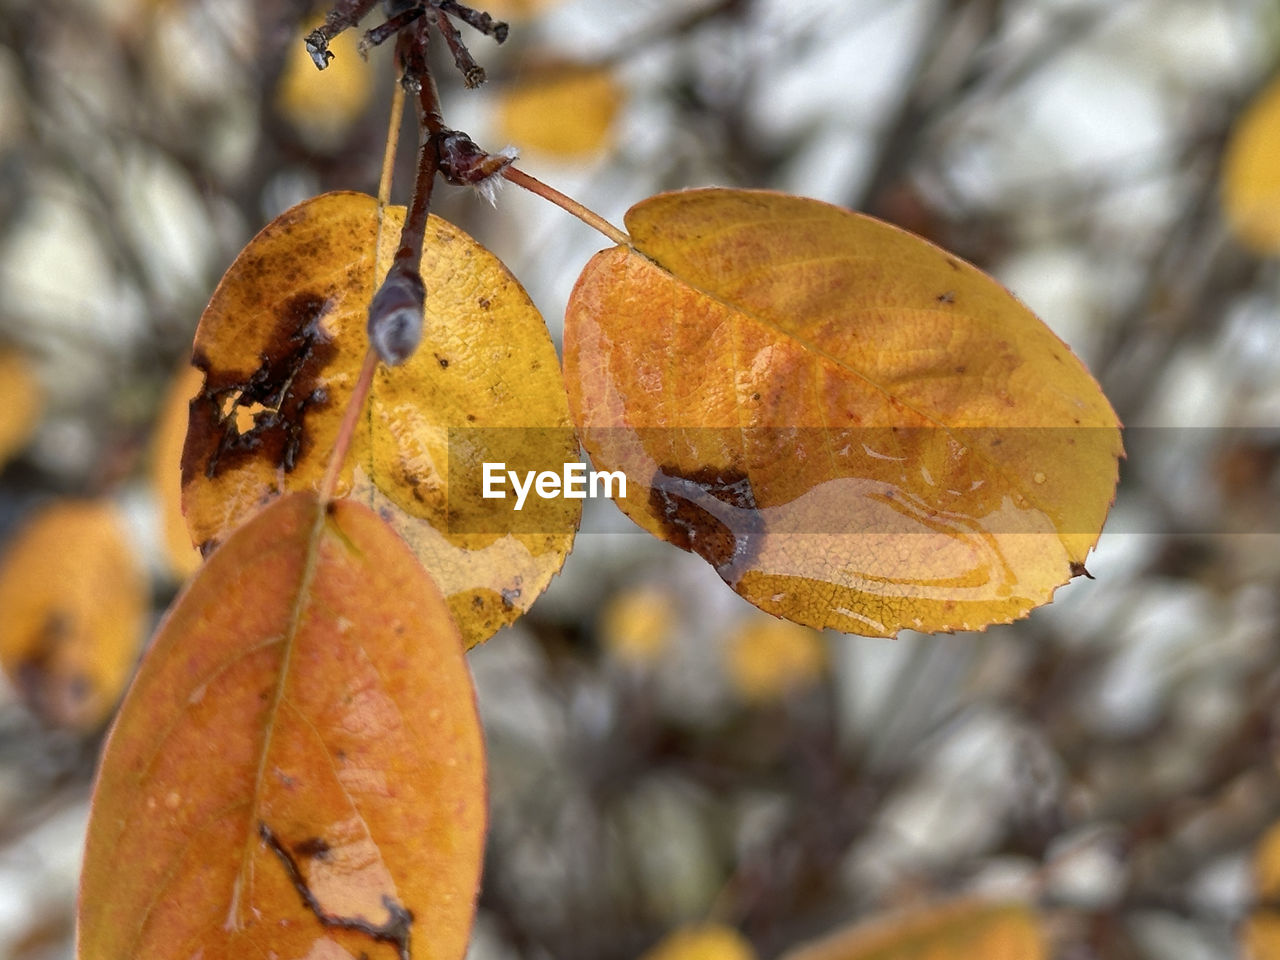 autumn, leaf, tree, macro photography, fruit, branch, food, nature, plant, focus on foreground, food and drink, close-up, produce, no people, yellow, healthy eating, plant part, flower, hanging, outdoors, winter, day, beauty in nature, dry, orange color, freshness, growth